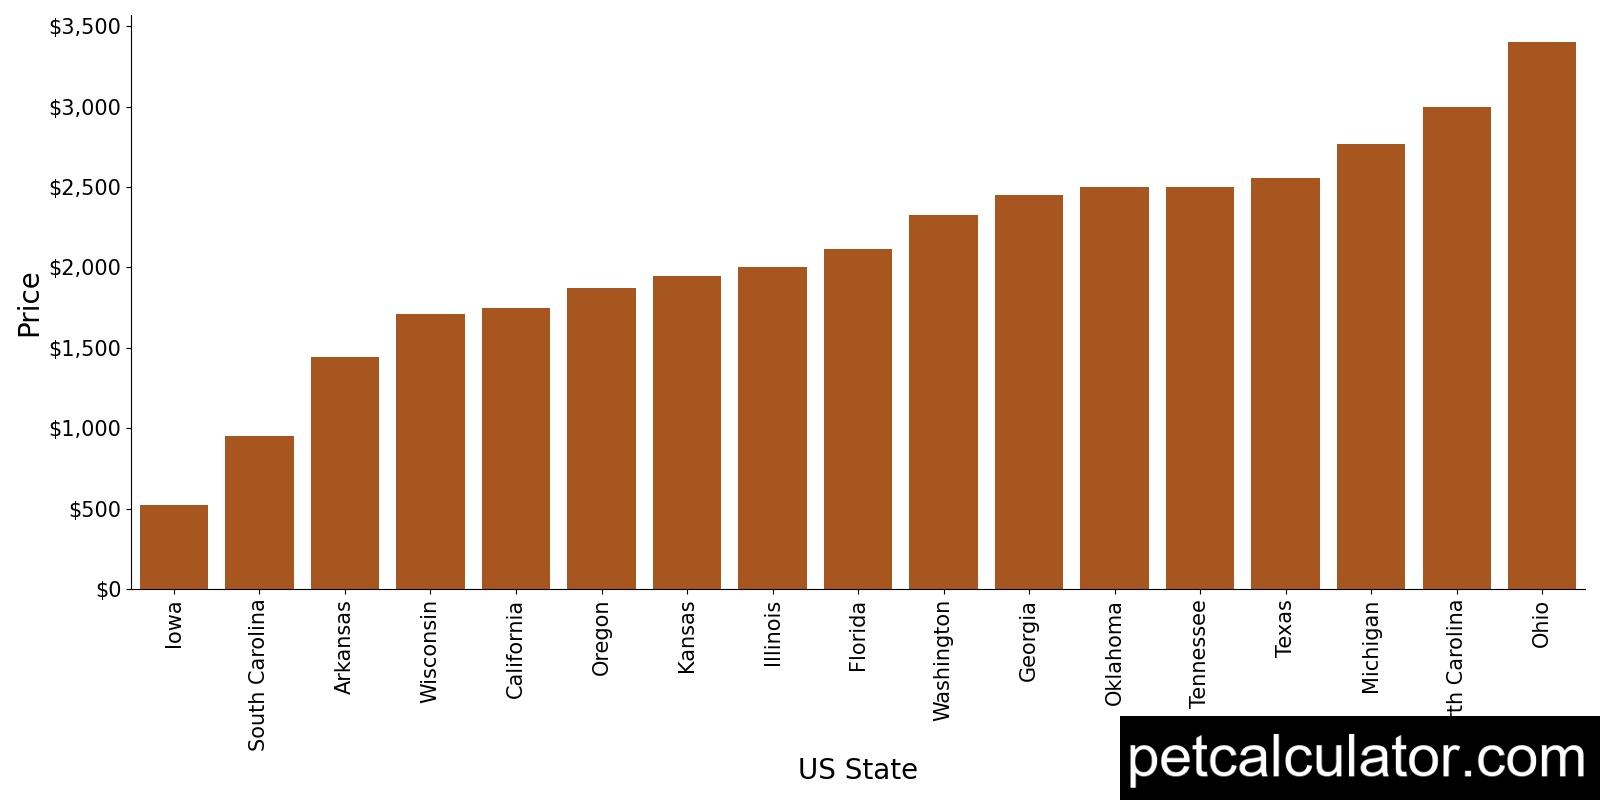 Price of Whippet by US State 